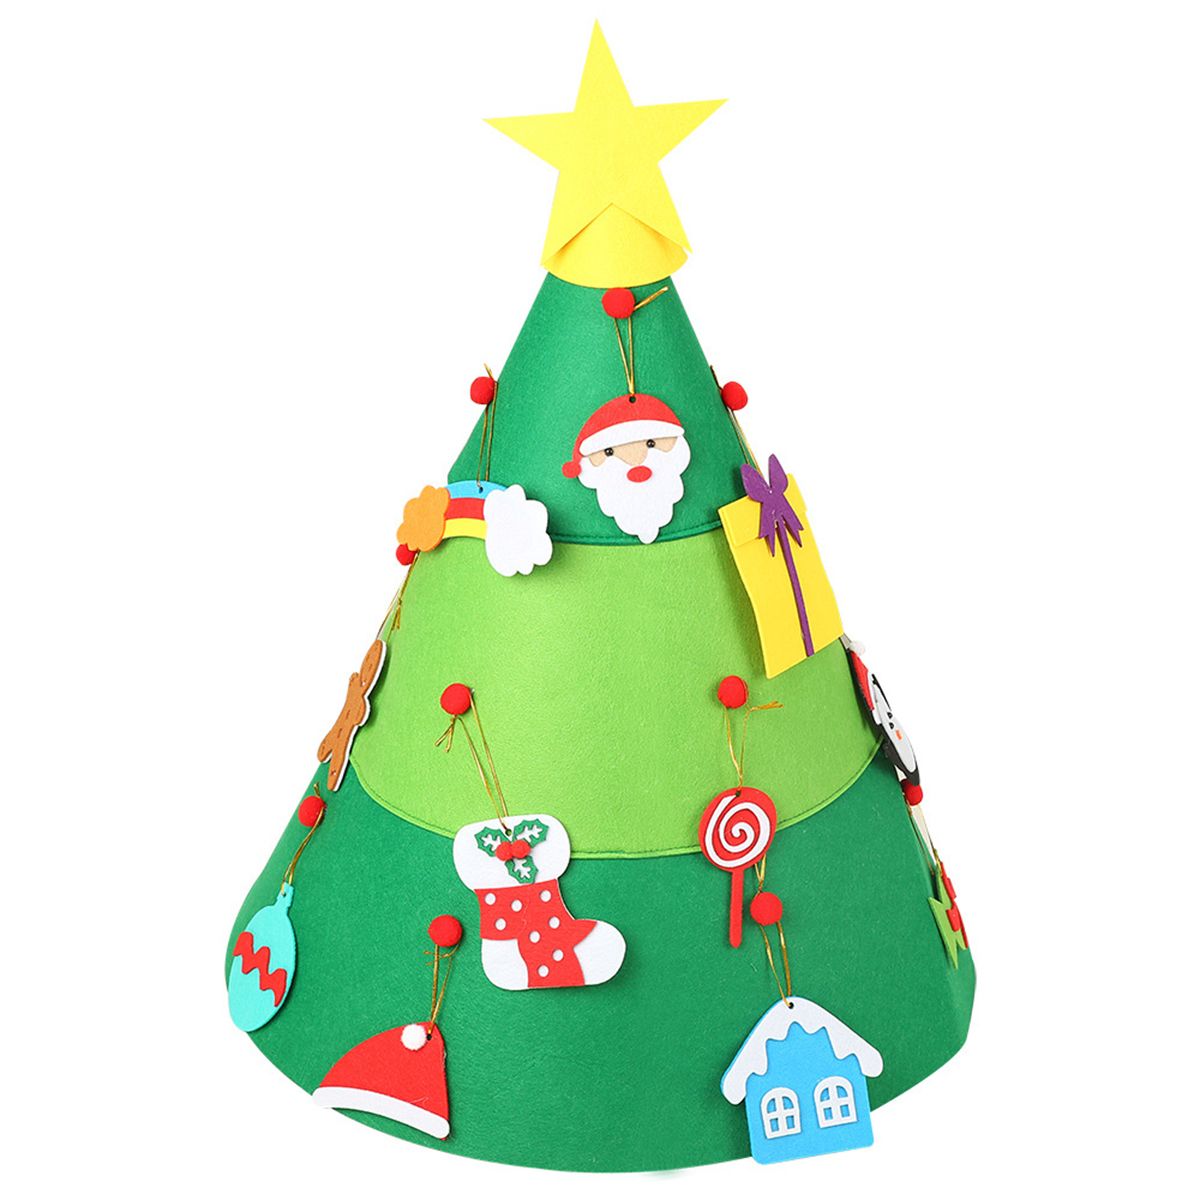 DIY-Christmas-Tree-Ornaments-Home-Decorations-Educational-Toys-Gifts-For-Kids-1605687